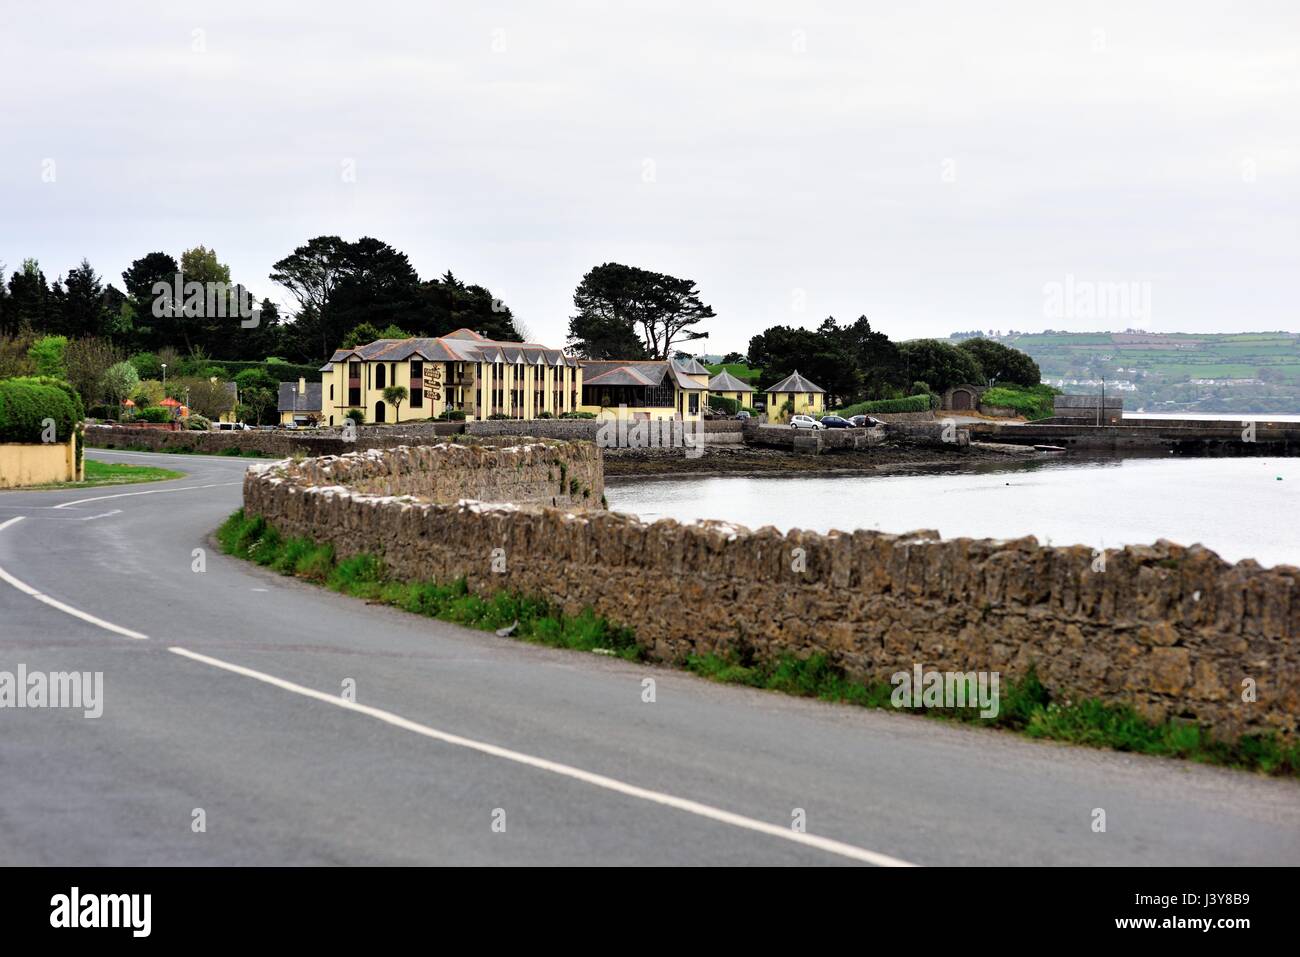 A winding roadway and wall follow the contours of the harbor leading to a resort in the Irish coastal community of Dungarvan in County Waterford. Stock Photo